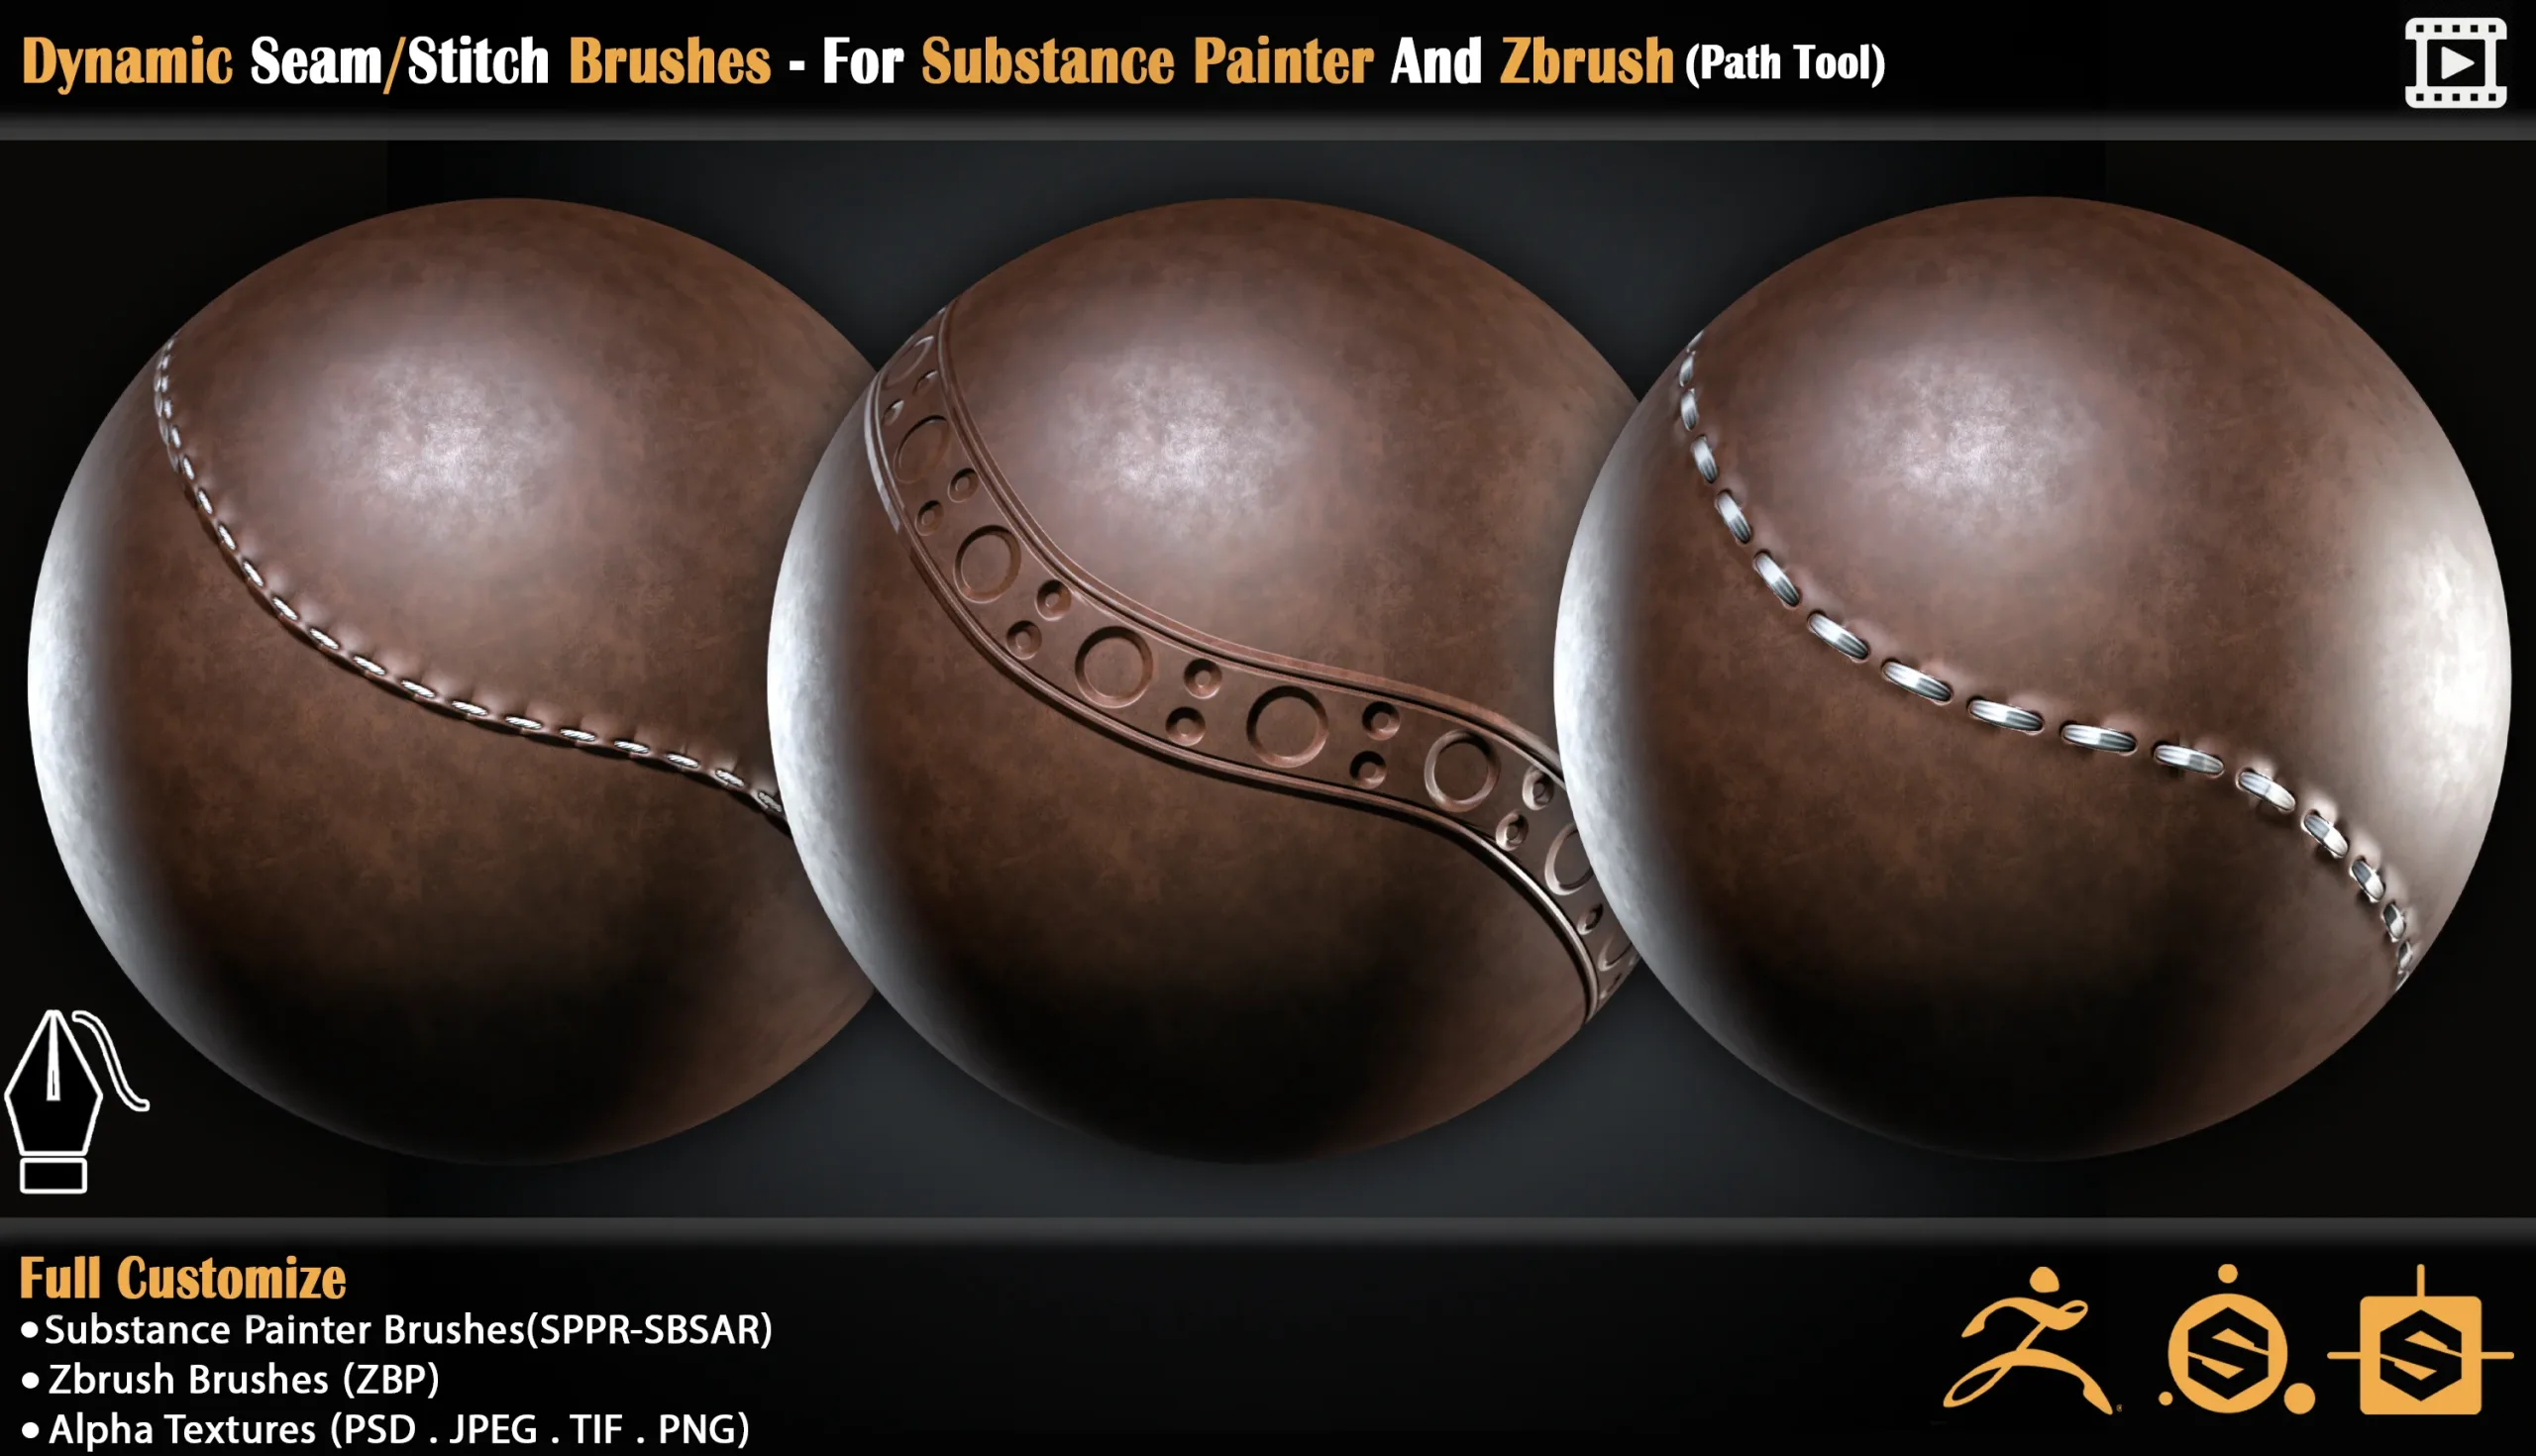 Dynamic Seam/Stitch Brushes - For Substance Painter And Zbrush (Path Tool)